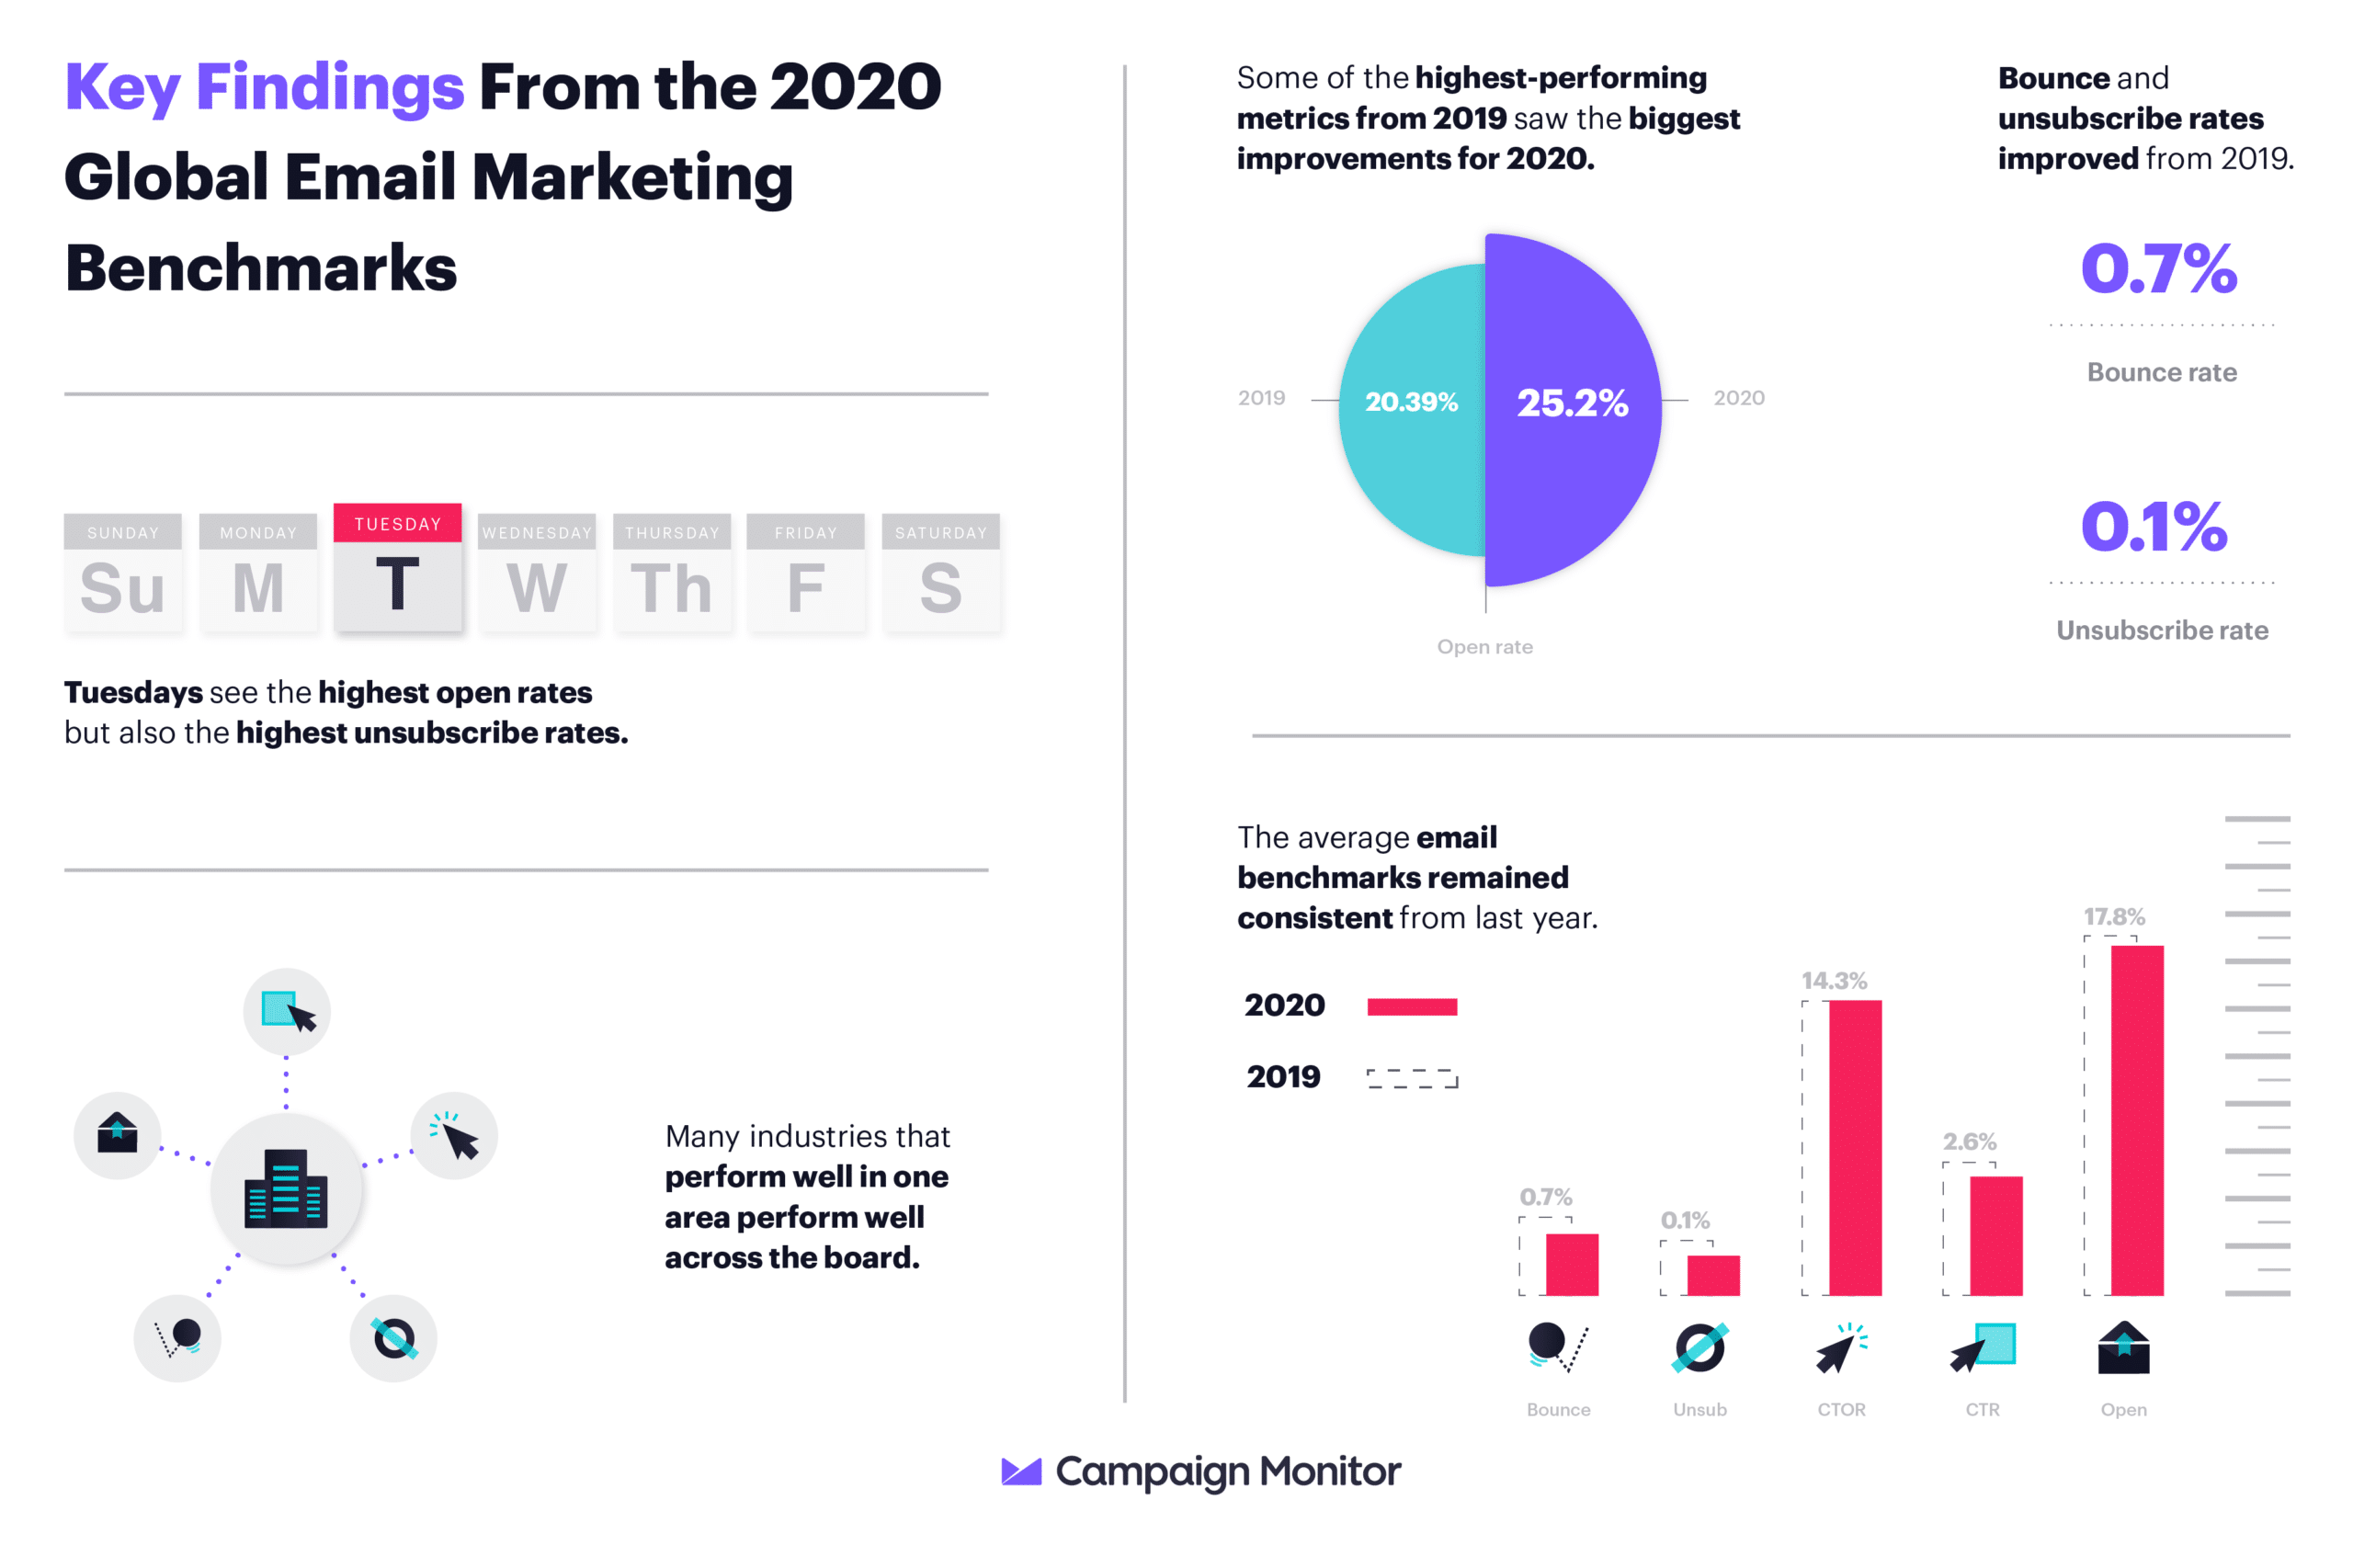 infographic of key findings from the 2020 email marketing benchmarks